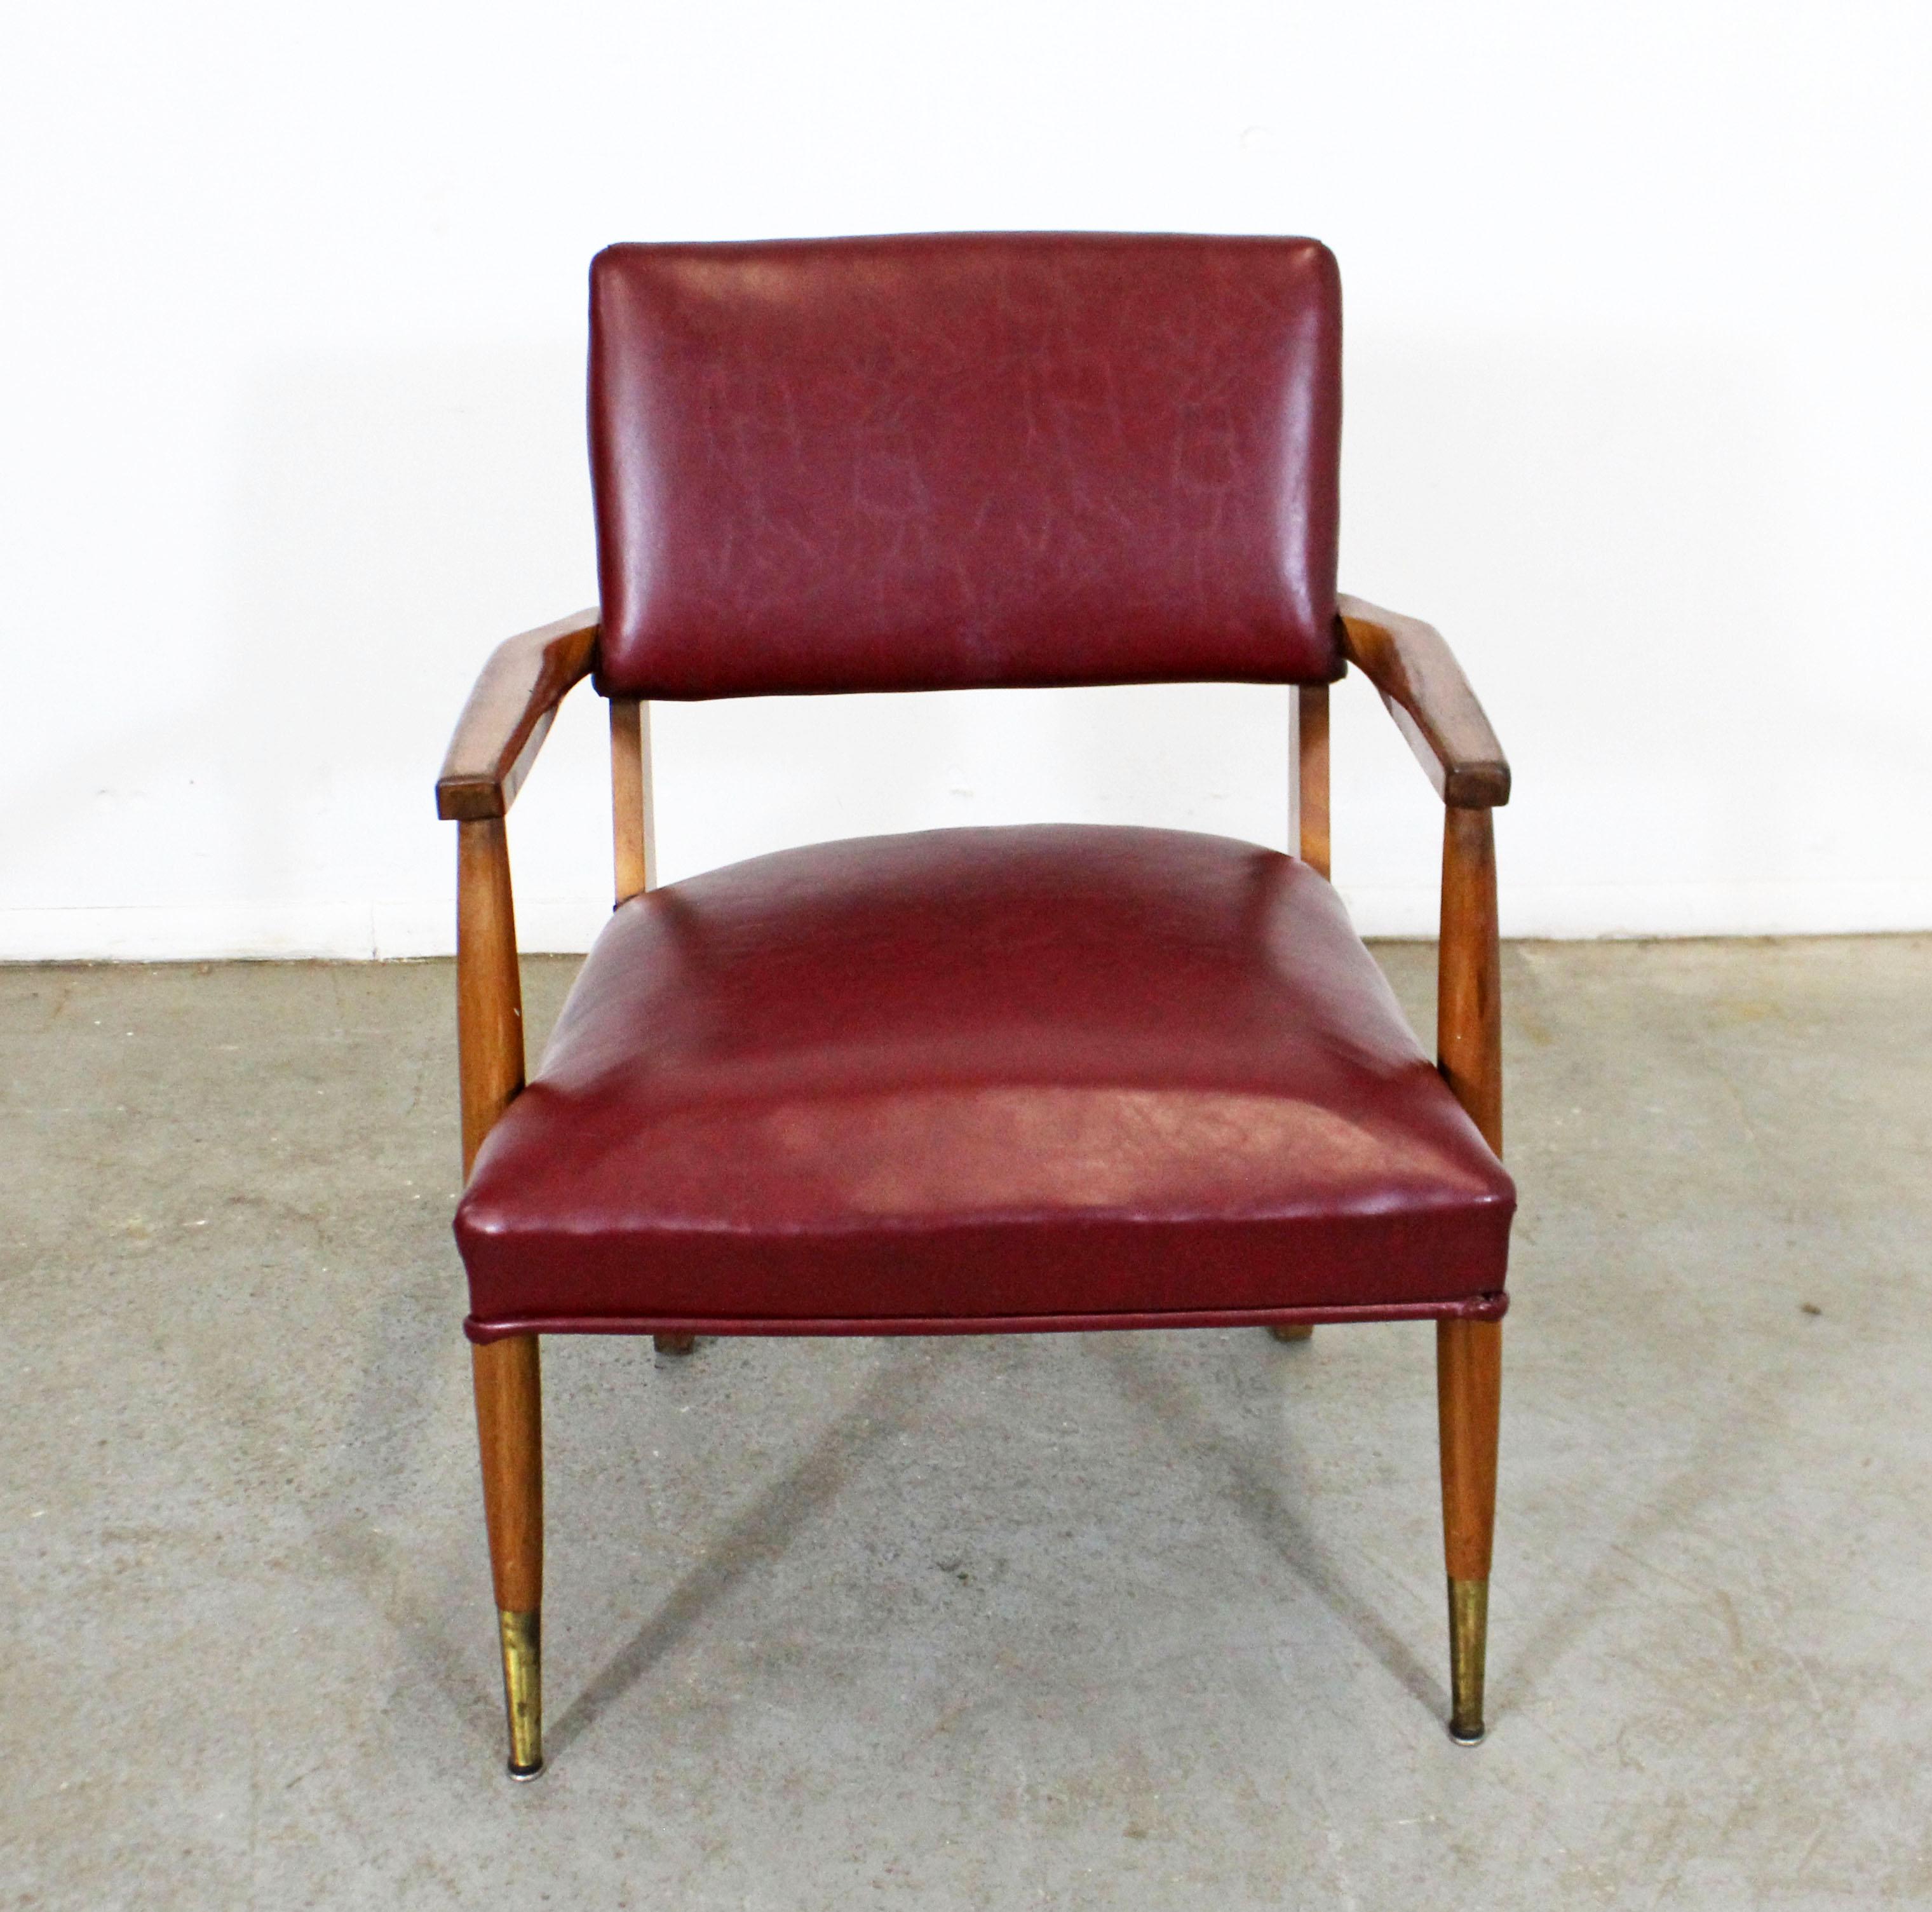 What a find. Offered is a comfortable vintage Mid-Century Modern arm chair with a wood base, brass feet, and faux leather upholstery (made circa 1950-1960). It is in good condition with normal age wear - surface wear or scratches, some separation at